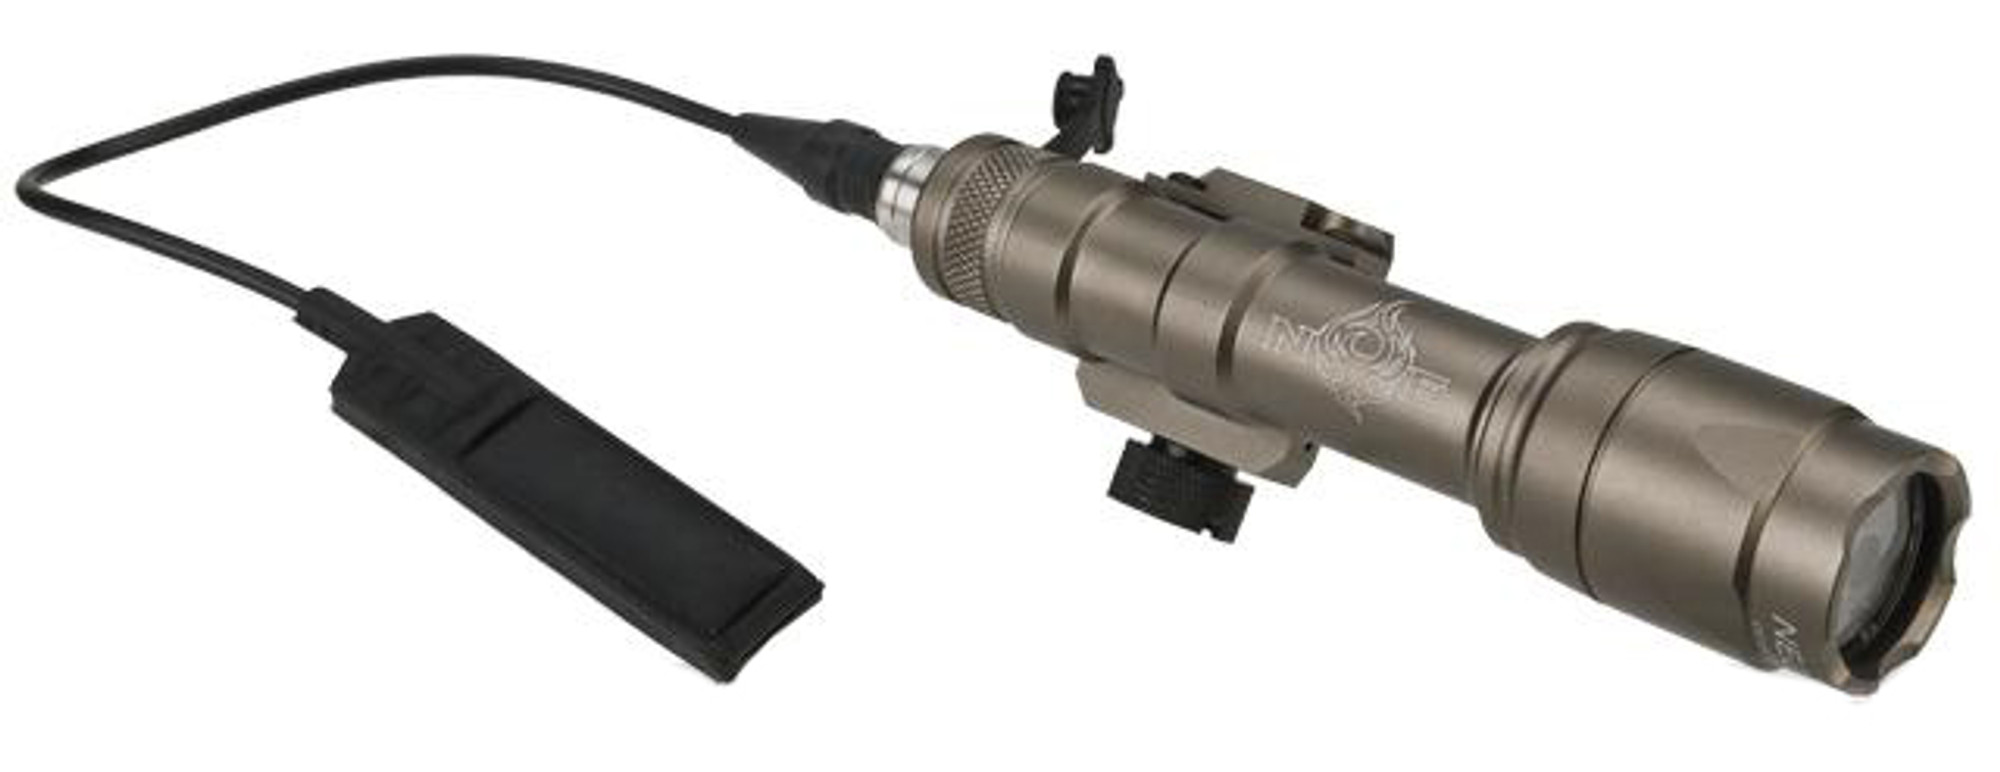 Bravo / Element Tactical CREE LED Scout Weapon Light w/ Pressure Pad - Dark Earth